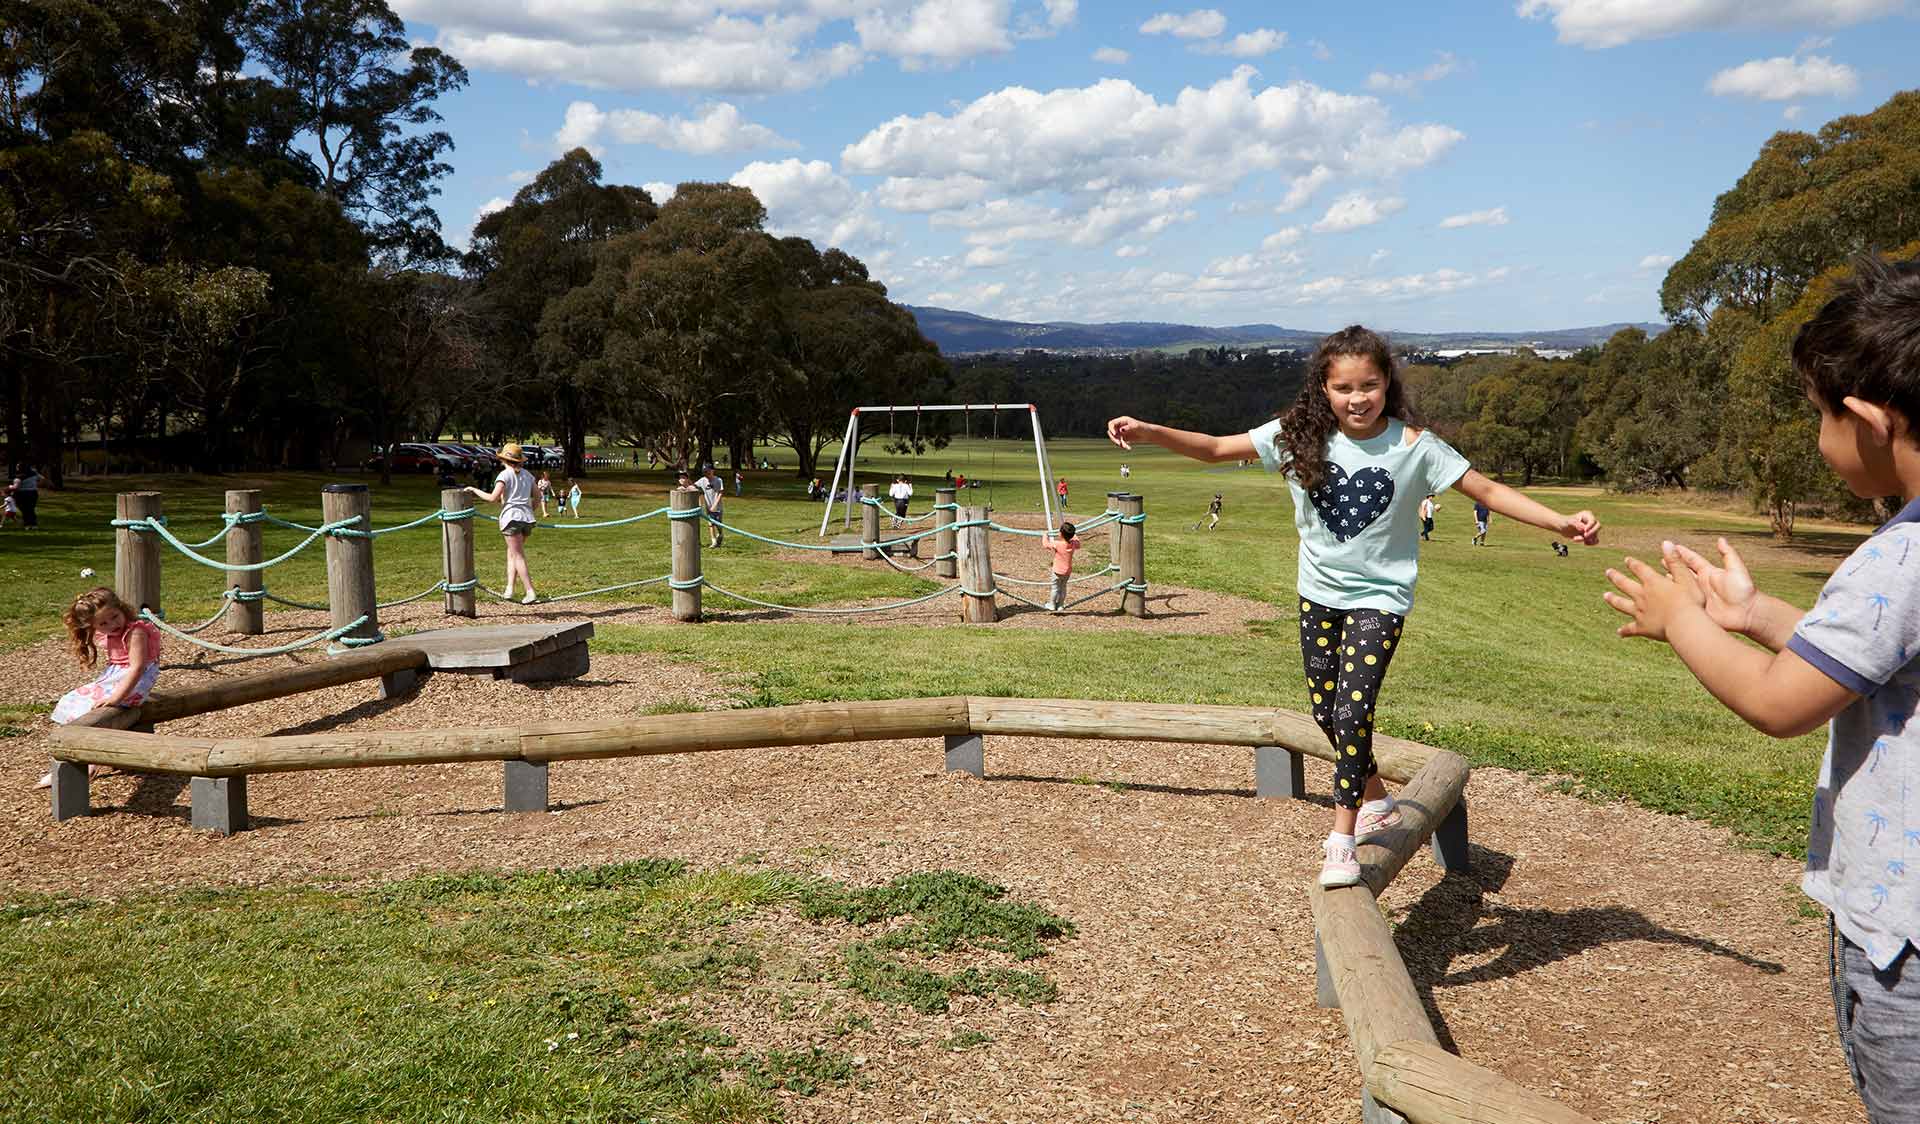 A young girl walking on a winding balance beam with children and families playing in the background at Yabby Hill Playscape